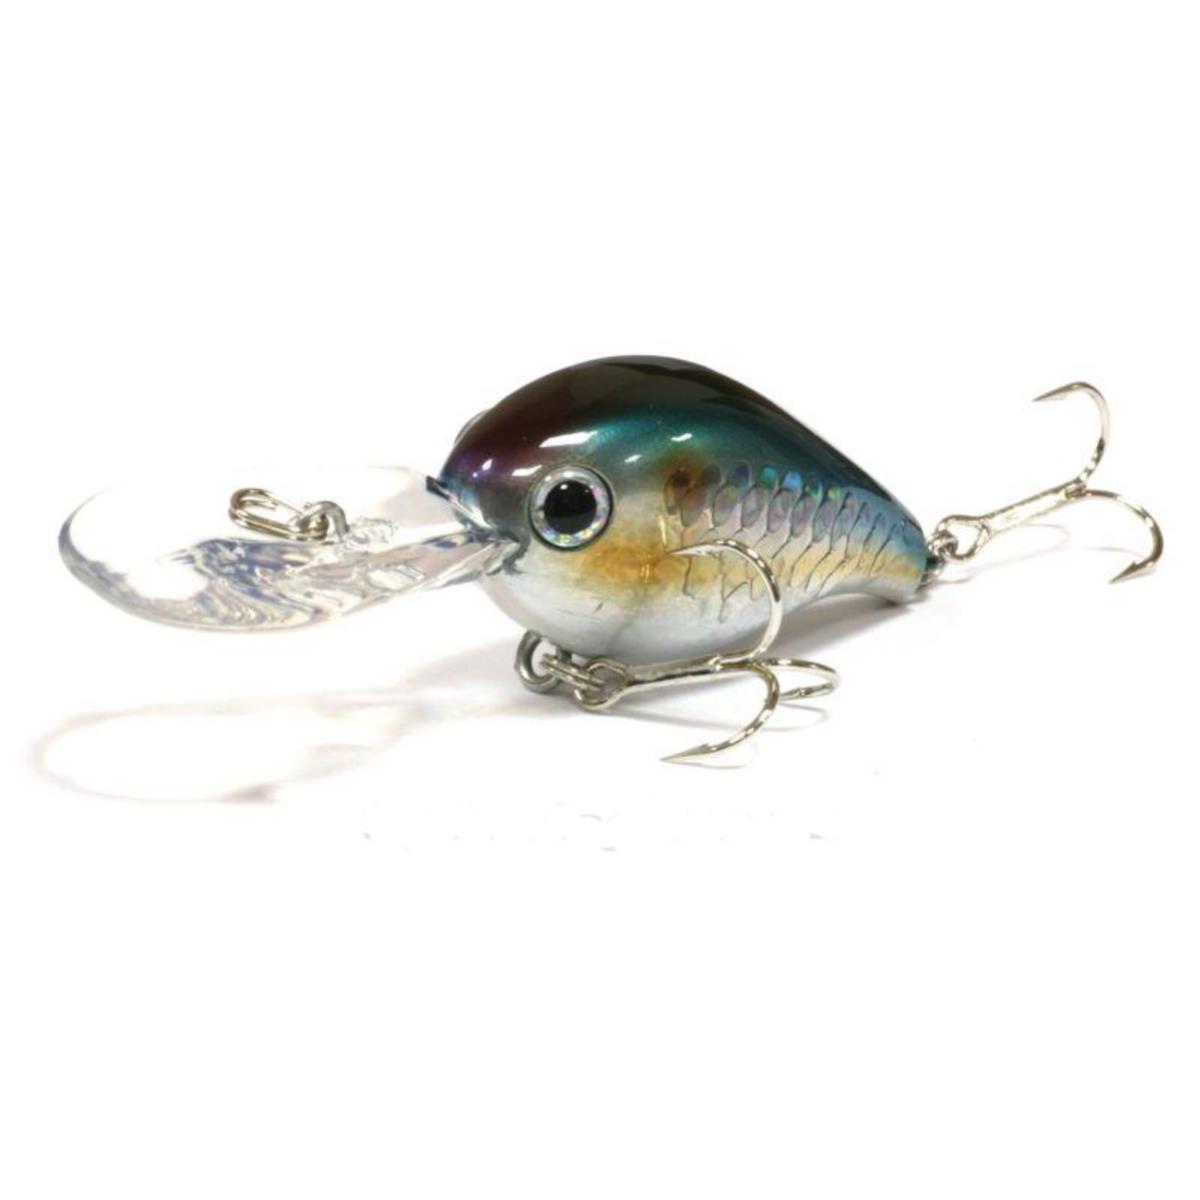 Воблер Clutch DR 270 MS American Shad Lucky Craft воблер clutch xd 077 original tennessee shad lucky craft